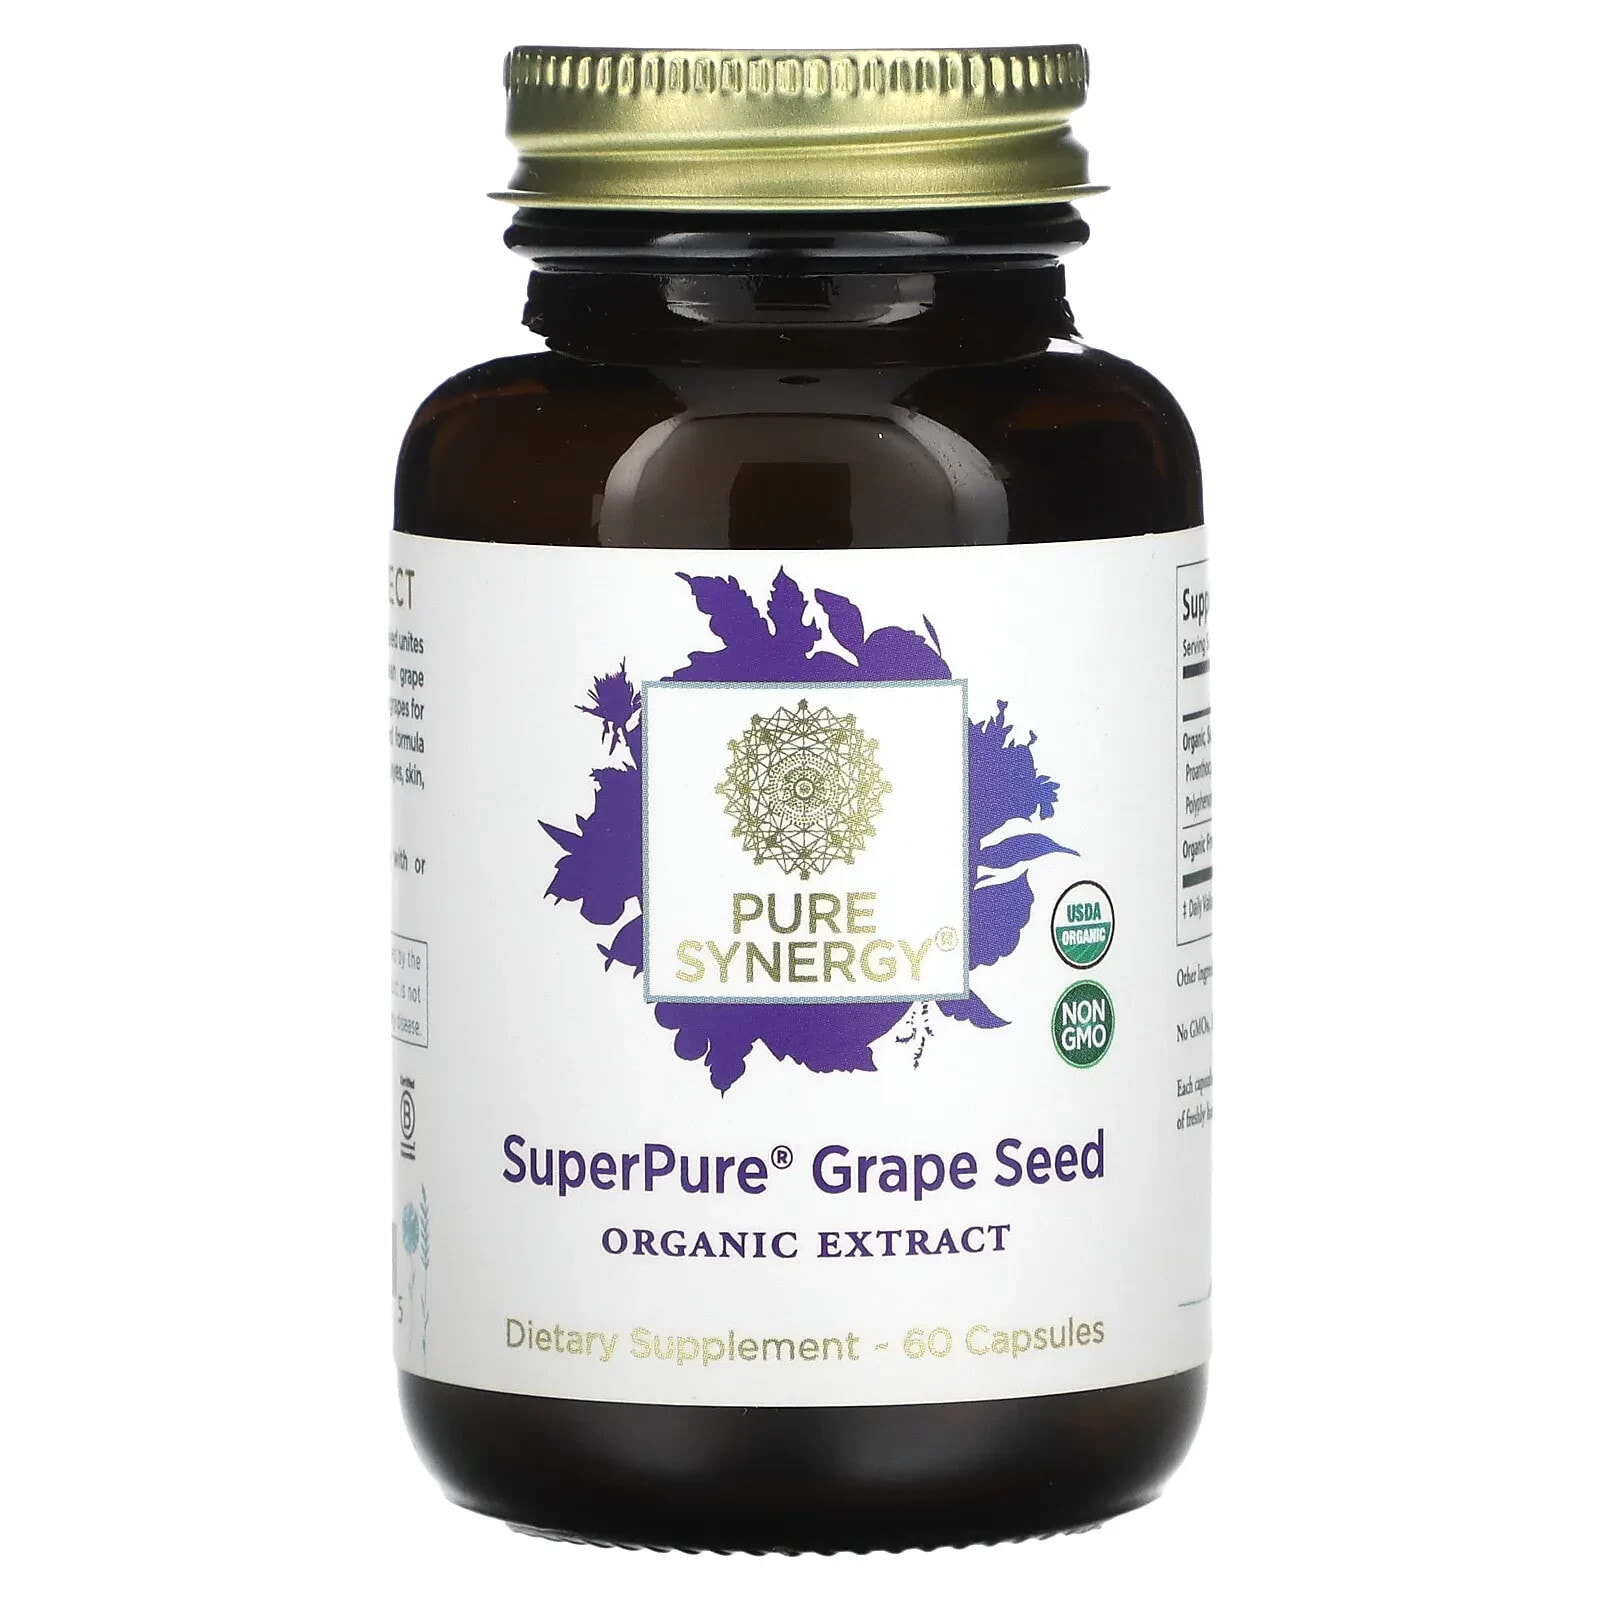 Super Pure Grape Seed, Organic Extract, 60 Capsules